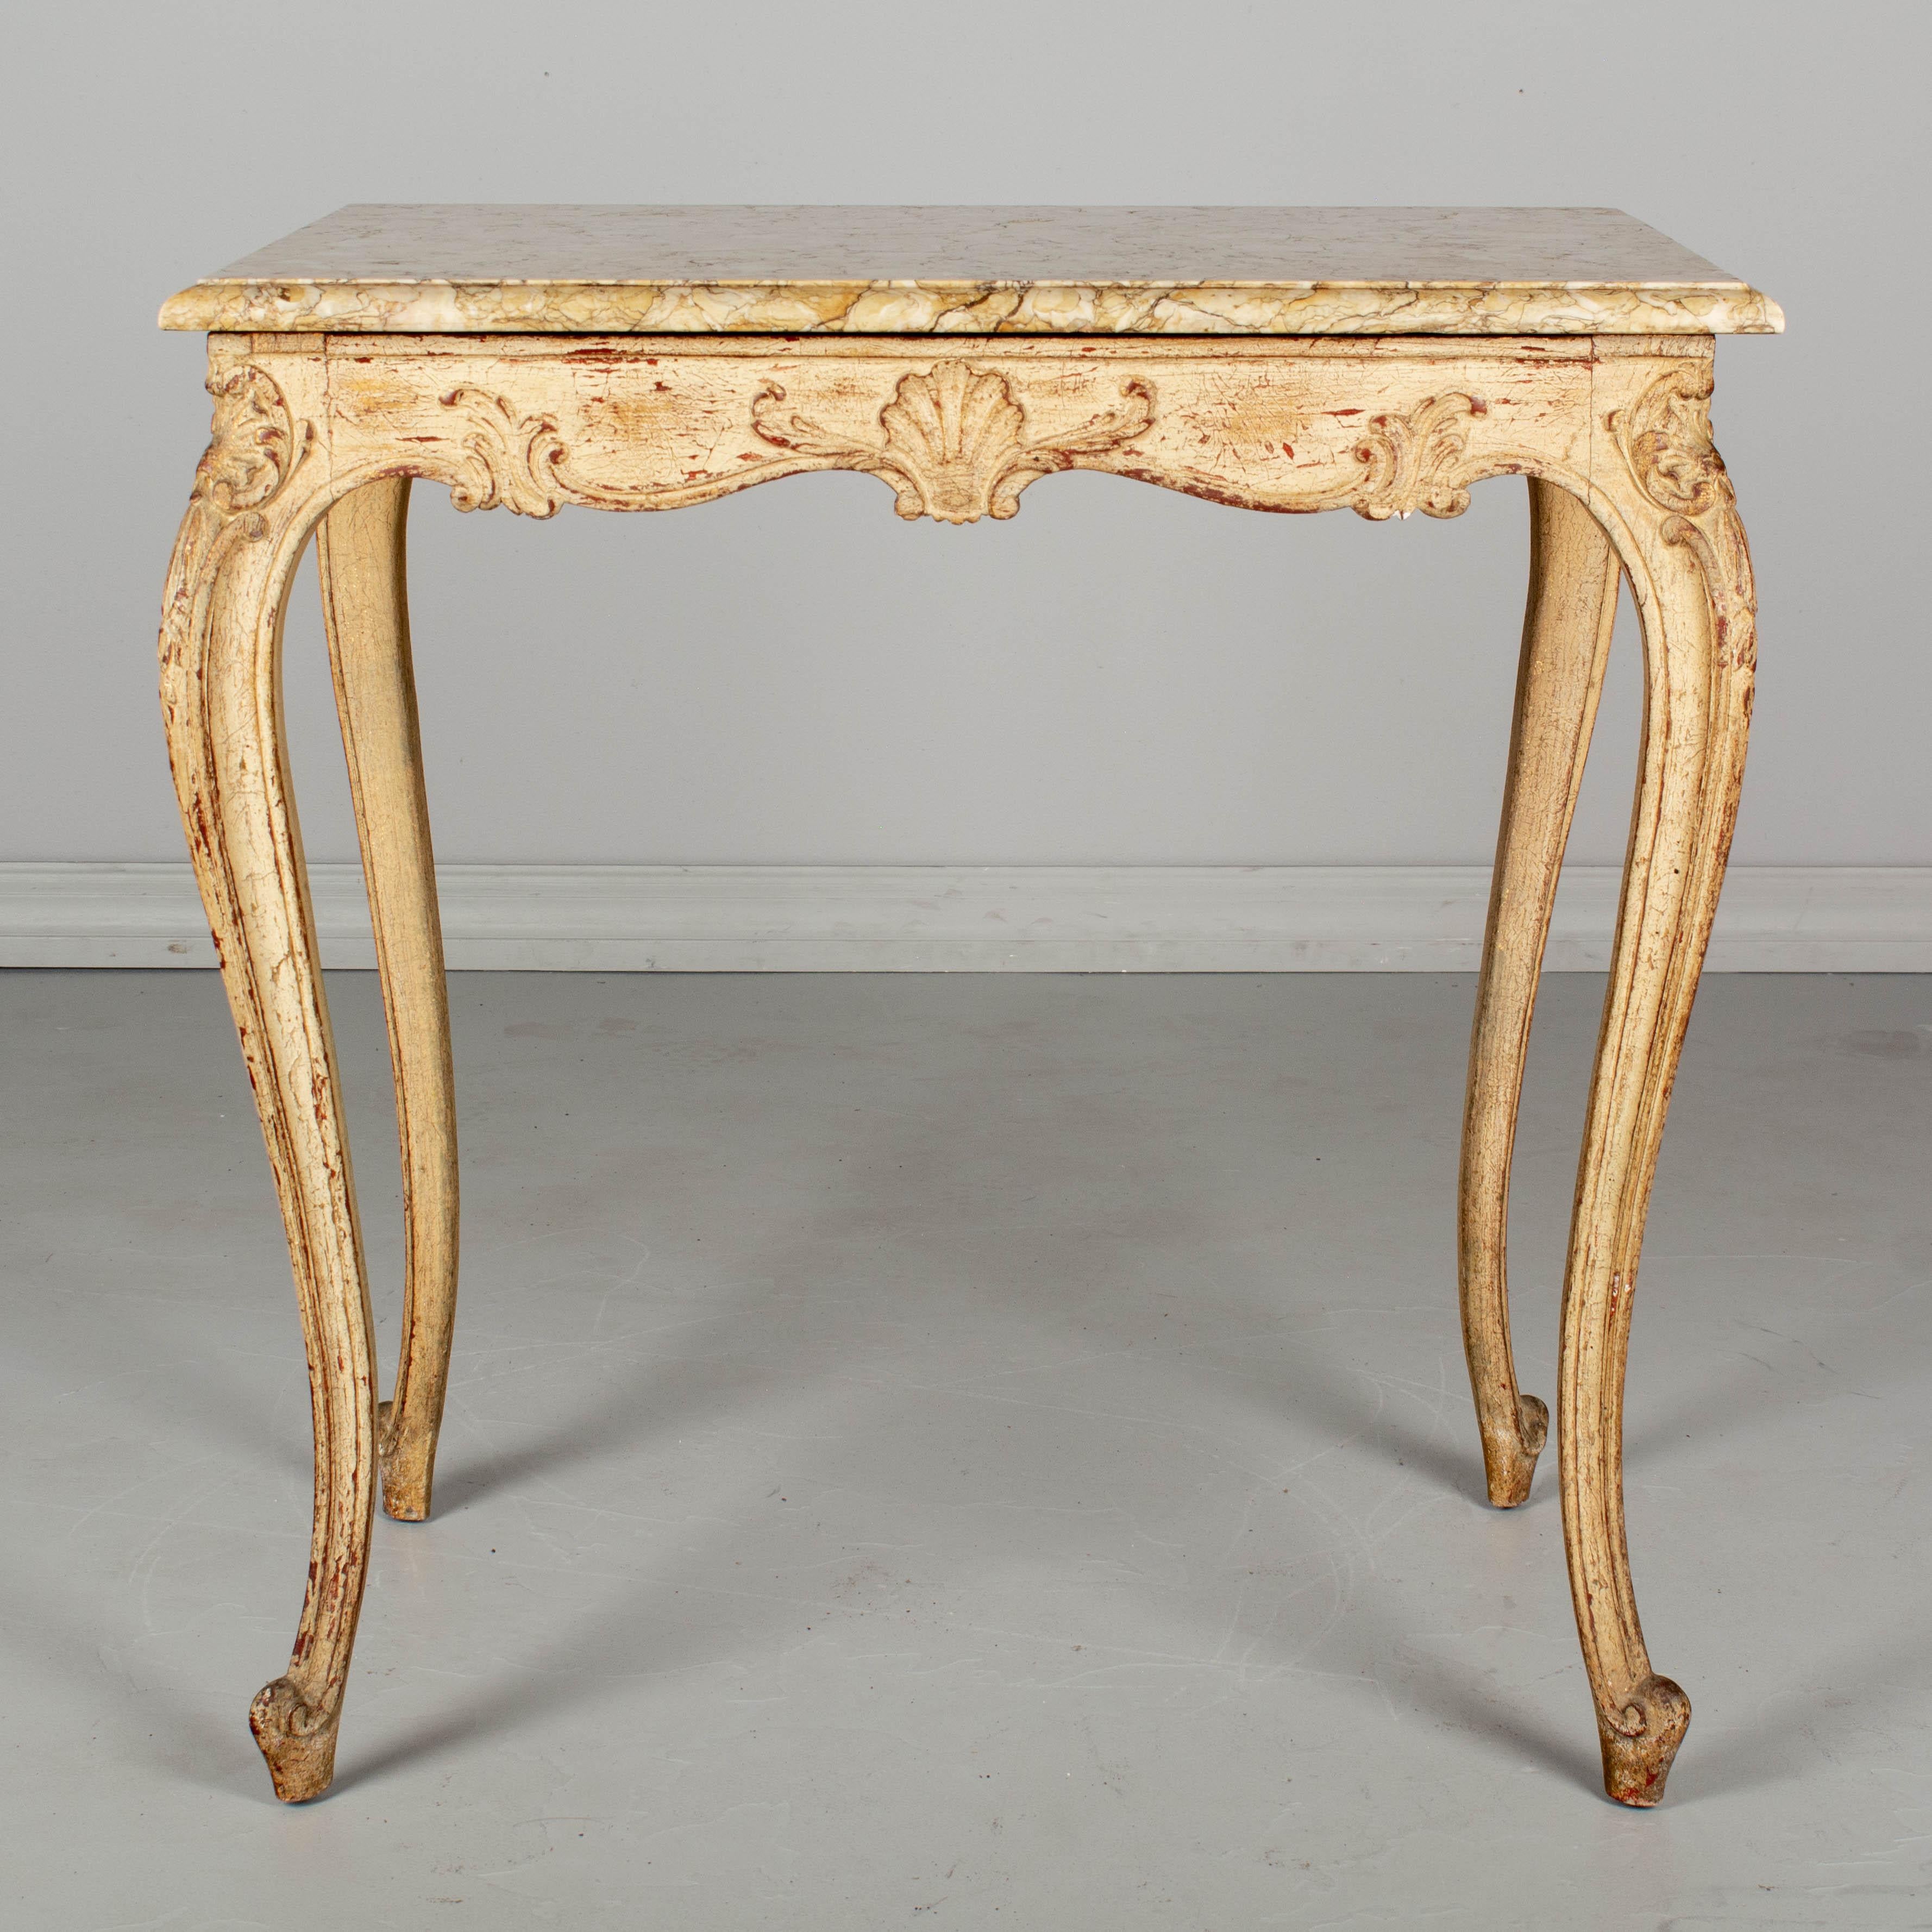 Early 20th c French Louis XV Style Marble-Top Table For Sale 1